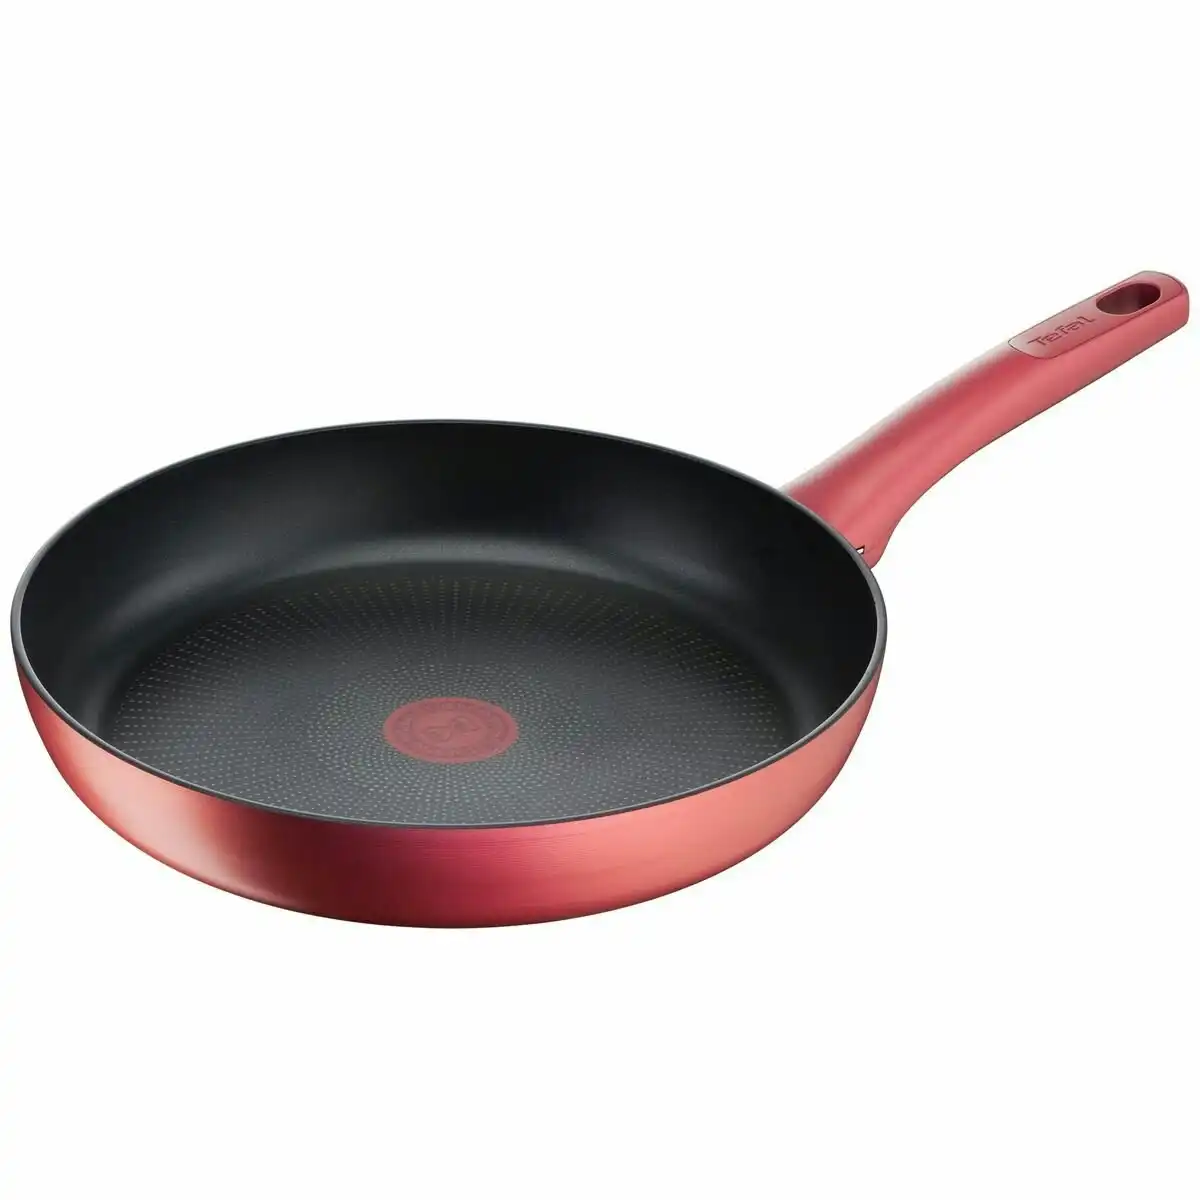 Tefal 28cm Perfect Cook Induction Non-Stick Frypan